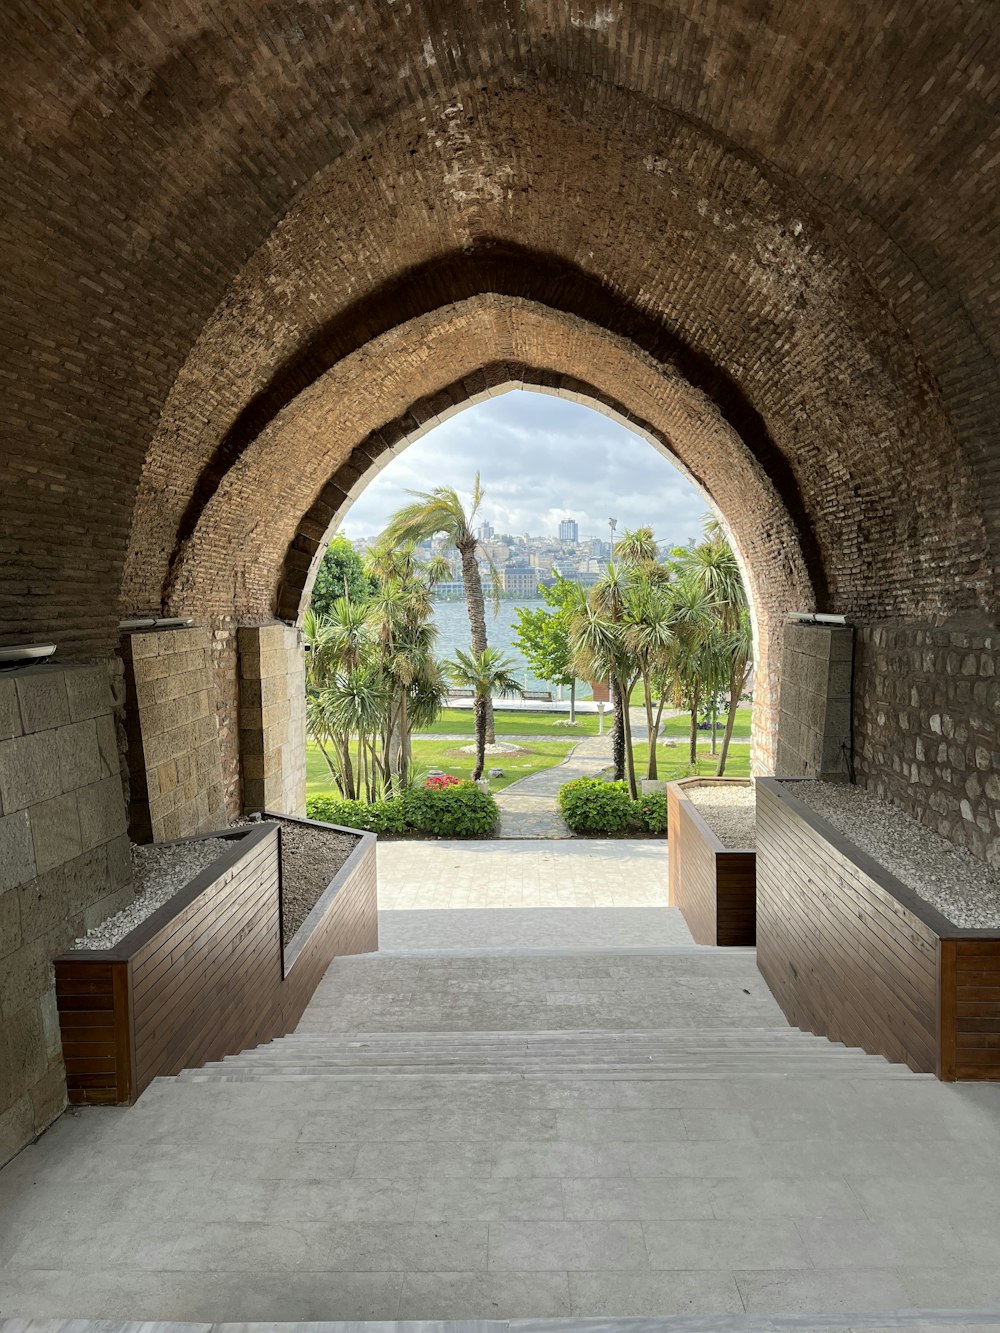 a stone tunnel with benches and palm trees